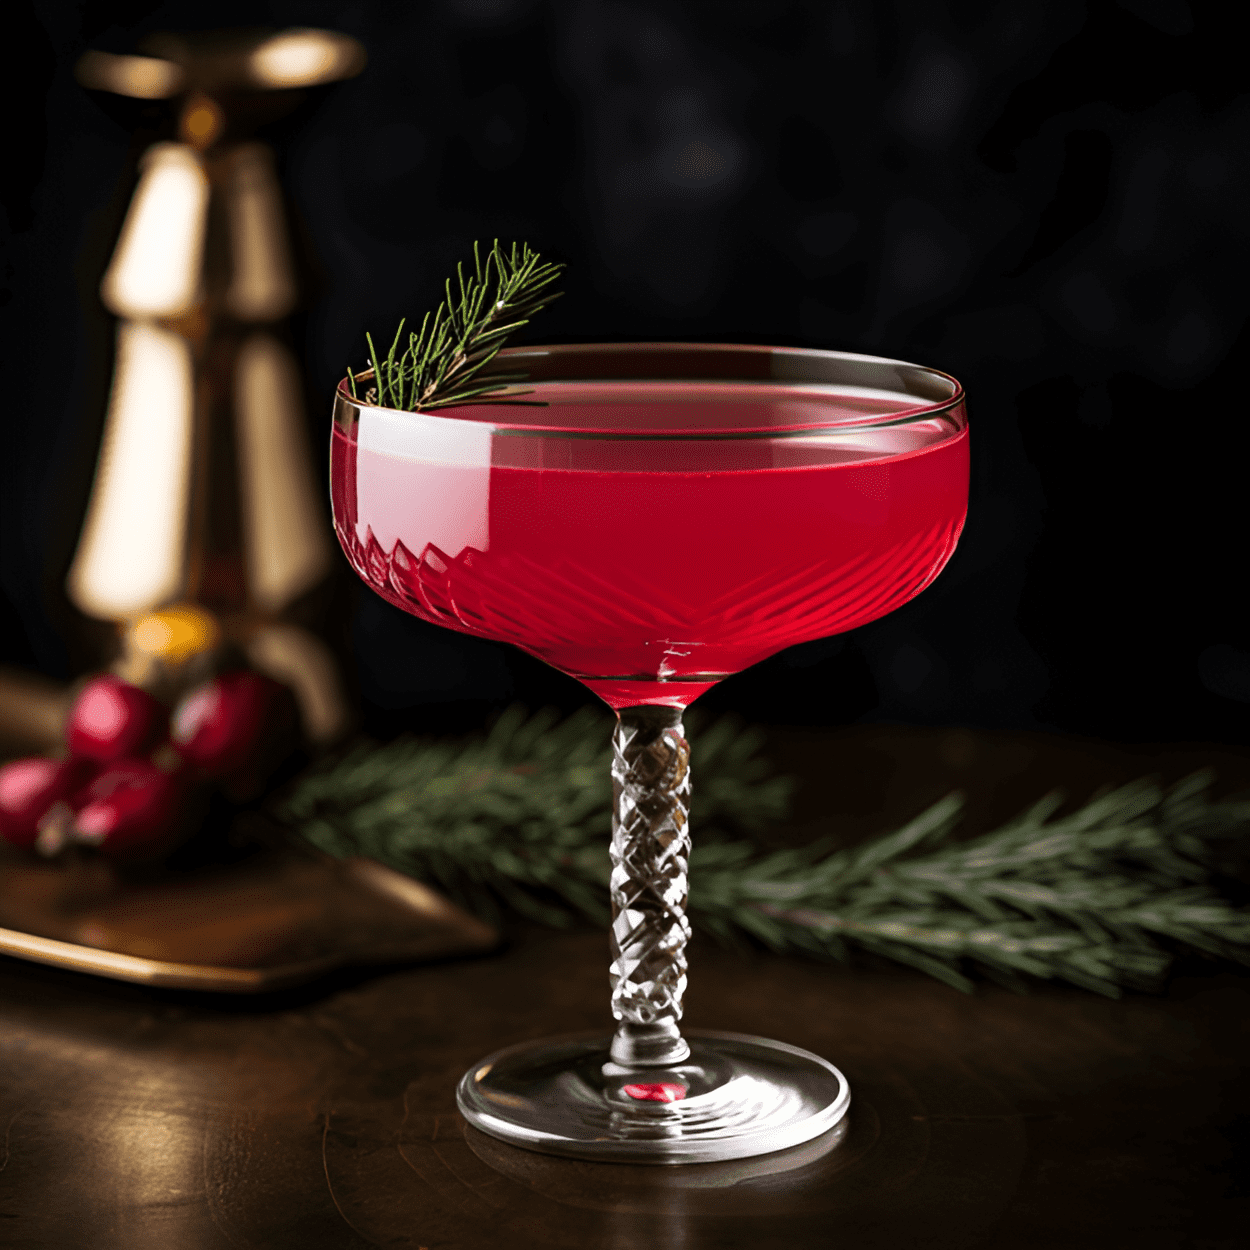 Commonwealth Cocktail Recipe - The Commonwealth Cocktail has a refreshing, slightly tart taste with a hint of sweetness. The gin provides a strong, juniper-forward base, while the lemon juice adds a citrusy tang. The grenadine gives it a sweet undertone, and the dash of absinthe adds a complex, herbal note.